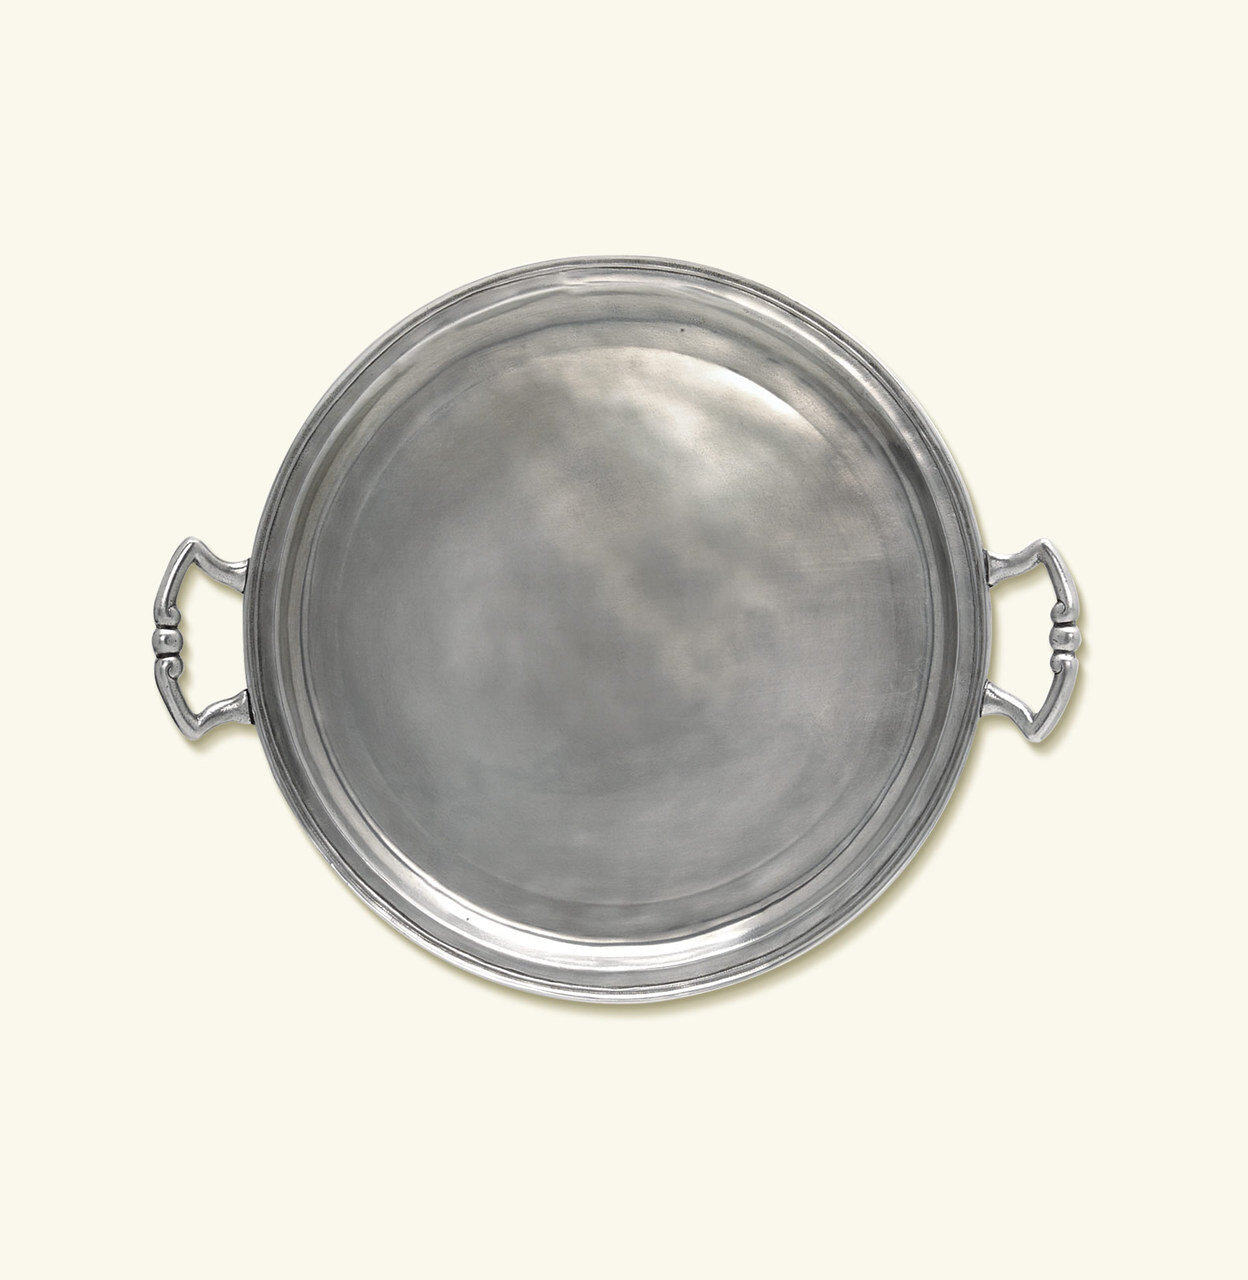 Match Pewter Round Tray With Handles 803.1